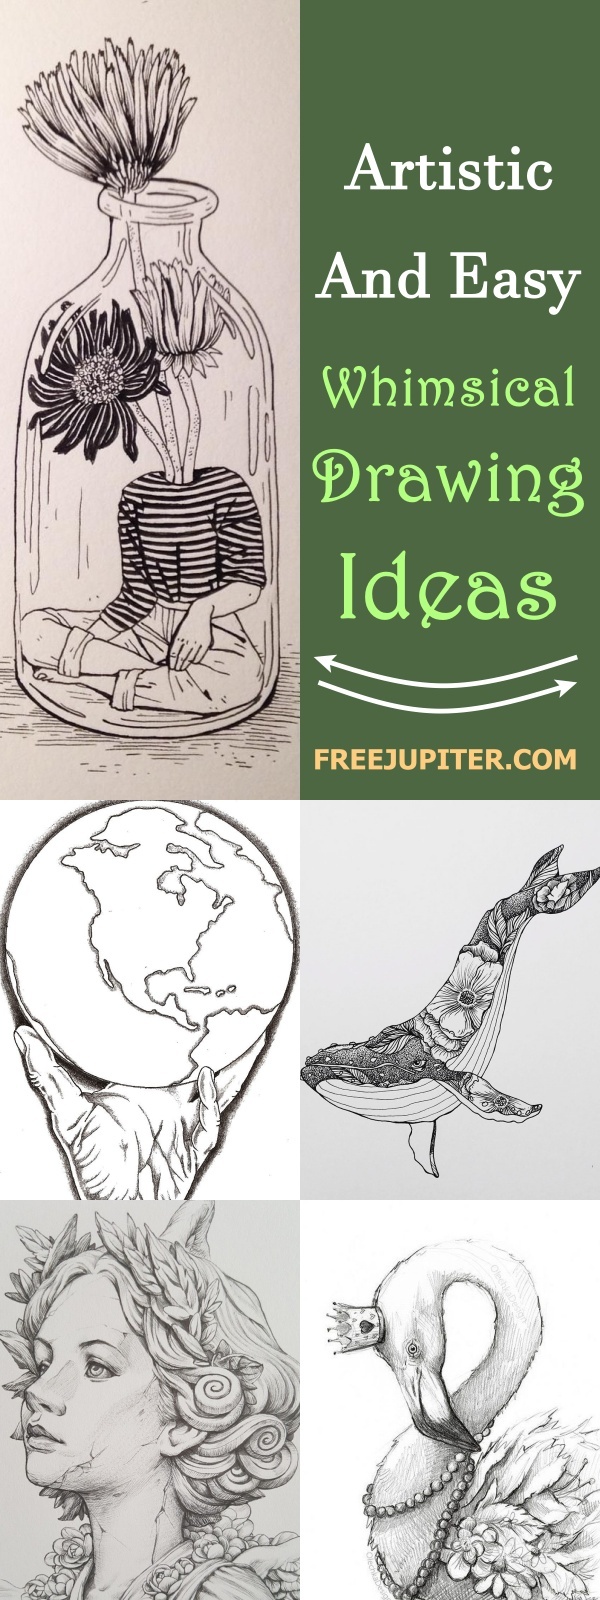 Artistic And Easy Whimsical Drawing Ideas